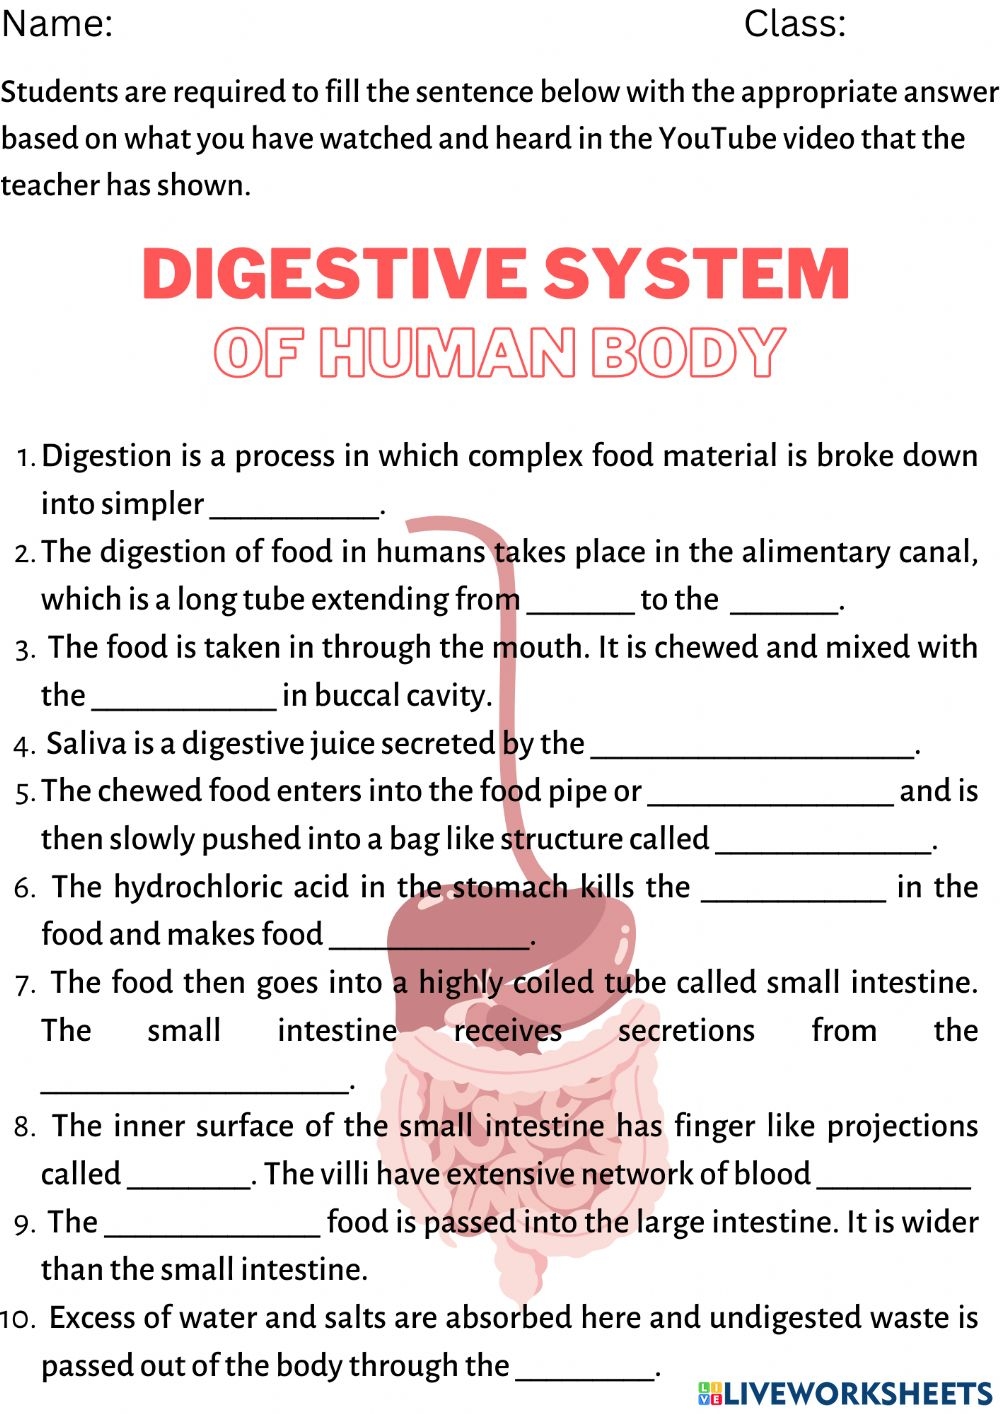 The Digestive System Worksheet For High School